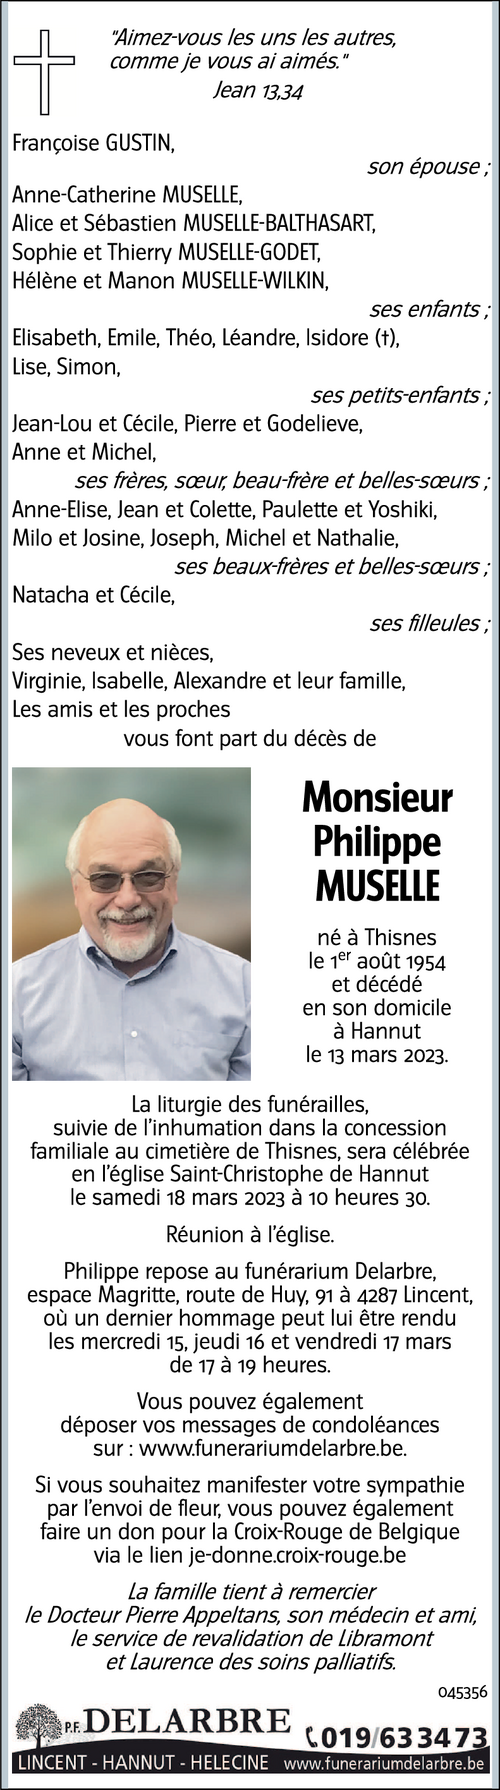 Philippe MUSELLE